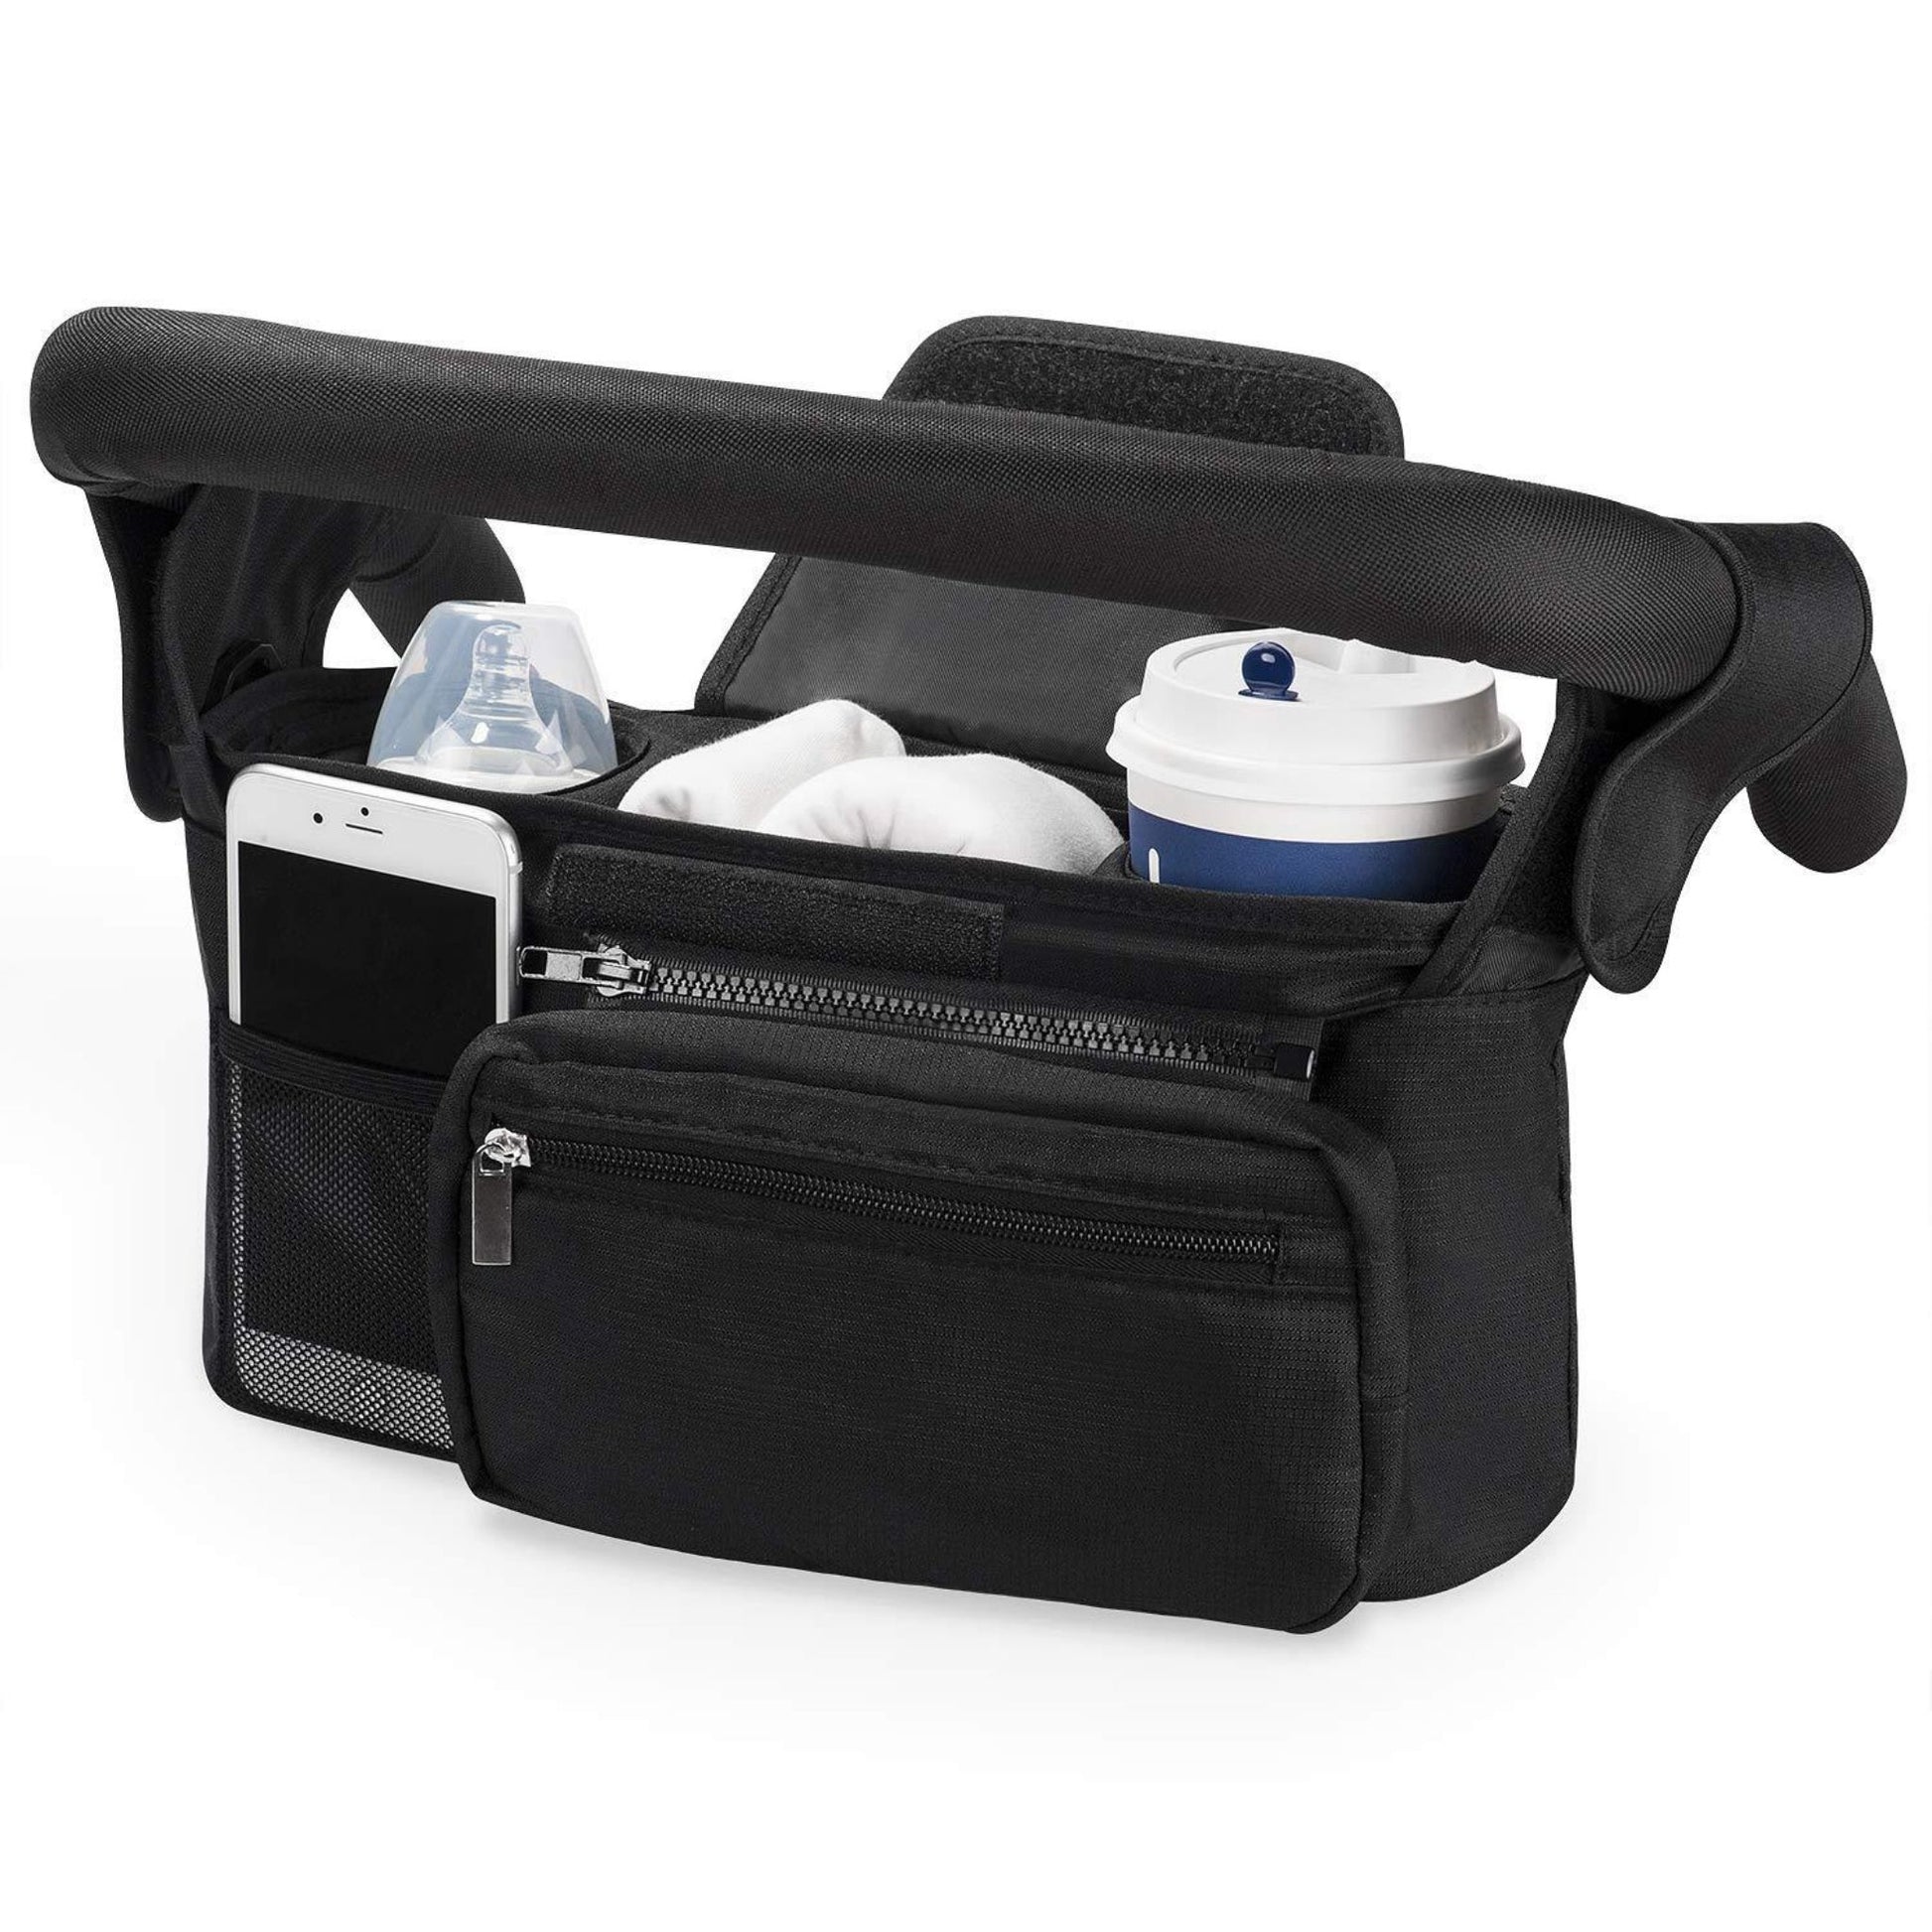 premium black stroller organizer with cup and phone holder | caddy organizer | black pram organizer 